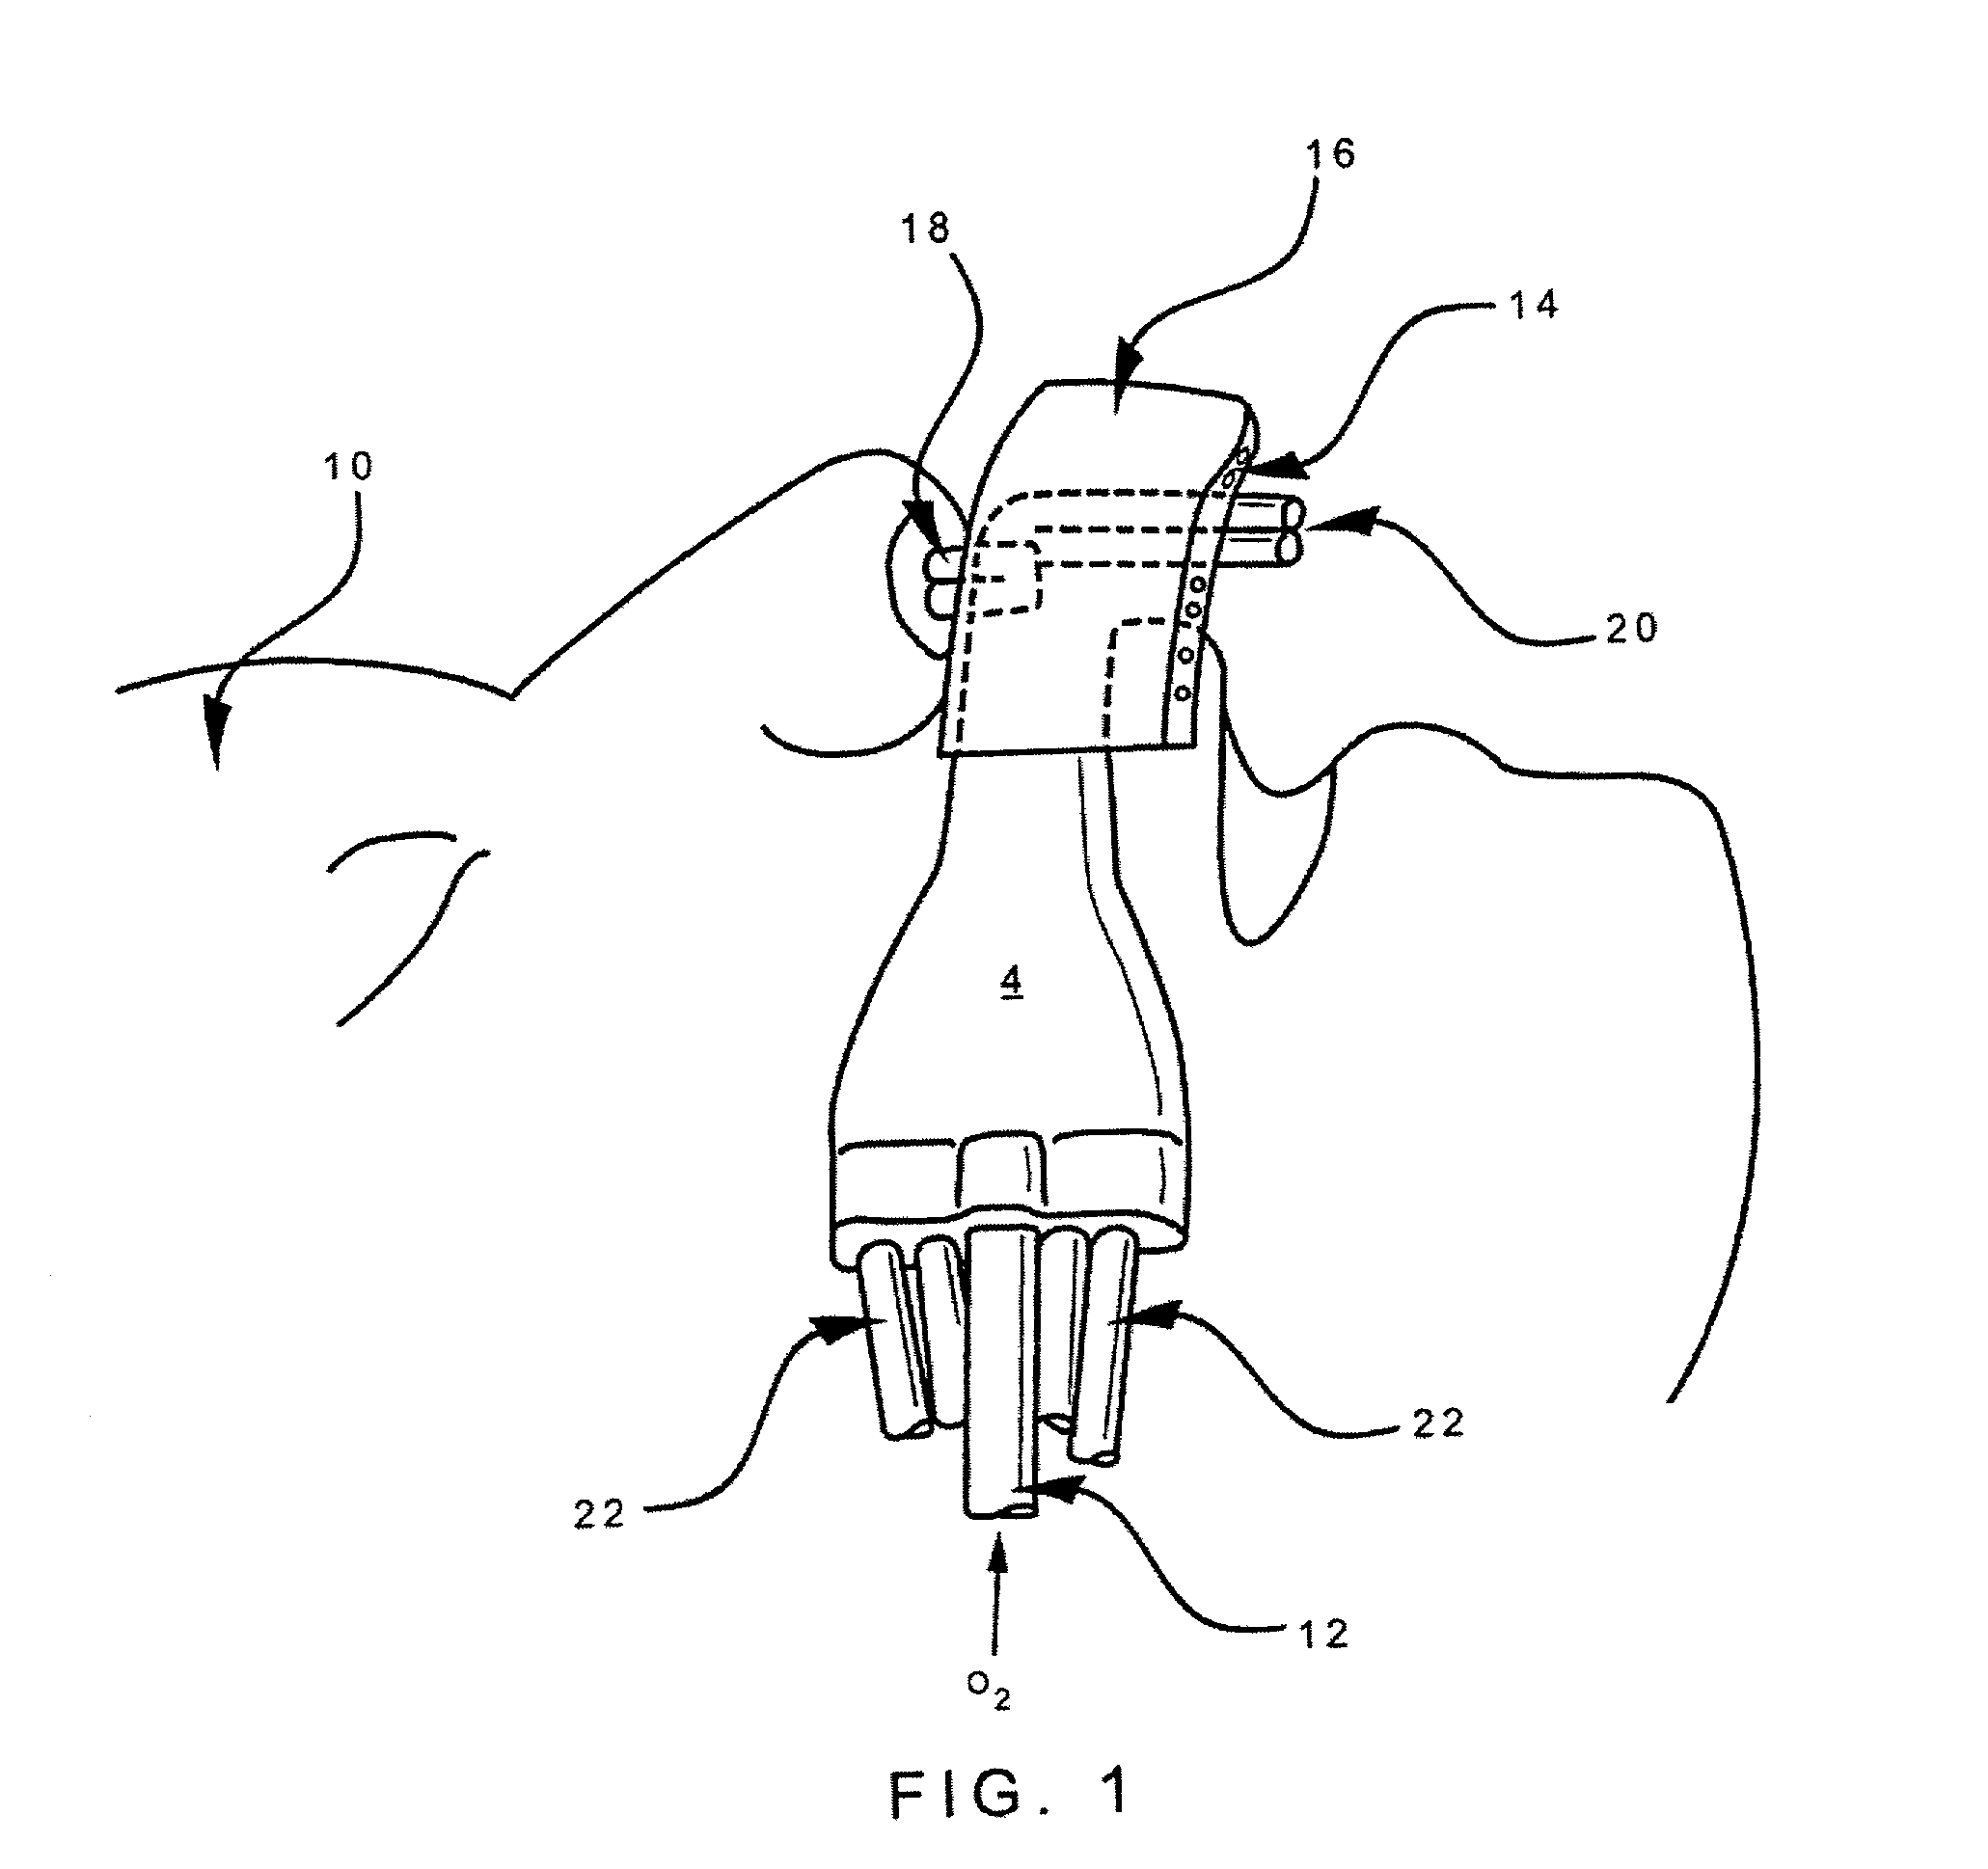 Apparatus and method for mask free delivery of an inspired gas mixture and gas sampling